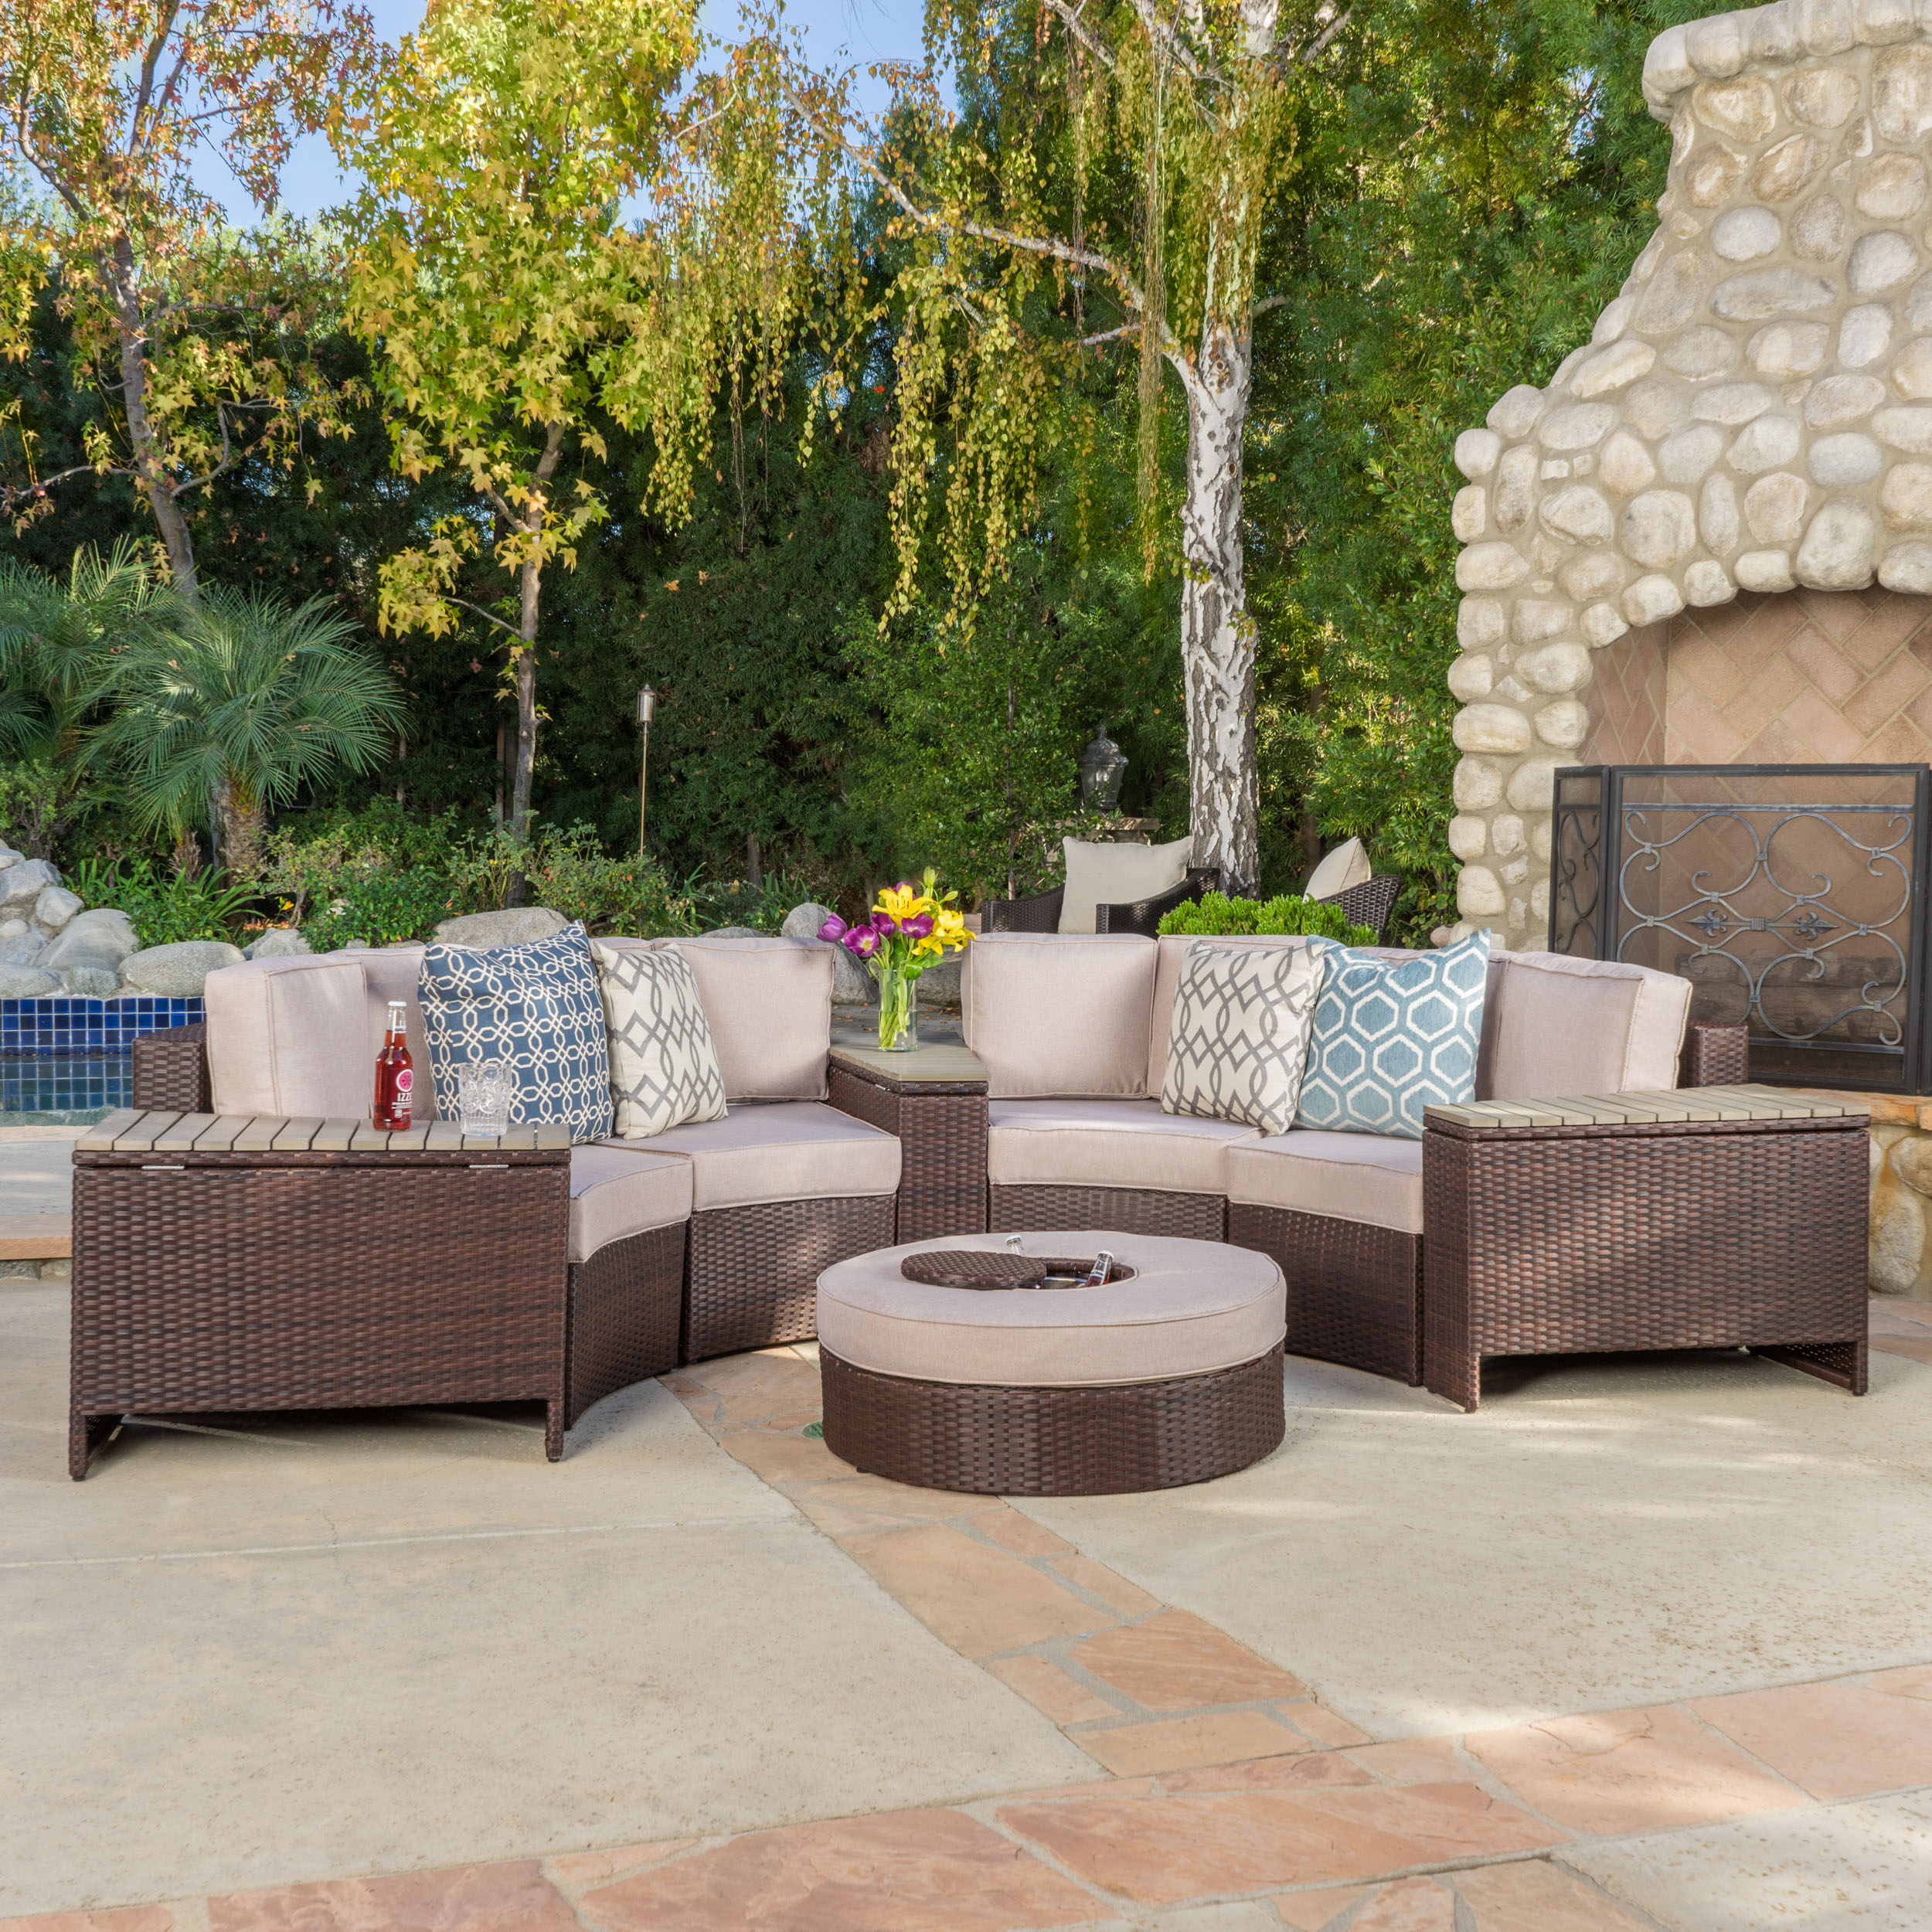 GDF Studio Bankston Outdoor Wicker Half Round 4 Seater Sectional Set with Ice Bucket Ottoman, Textured Beige and Brown - image 2 of 13